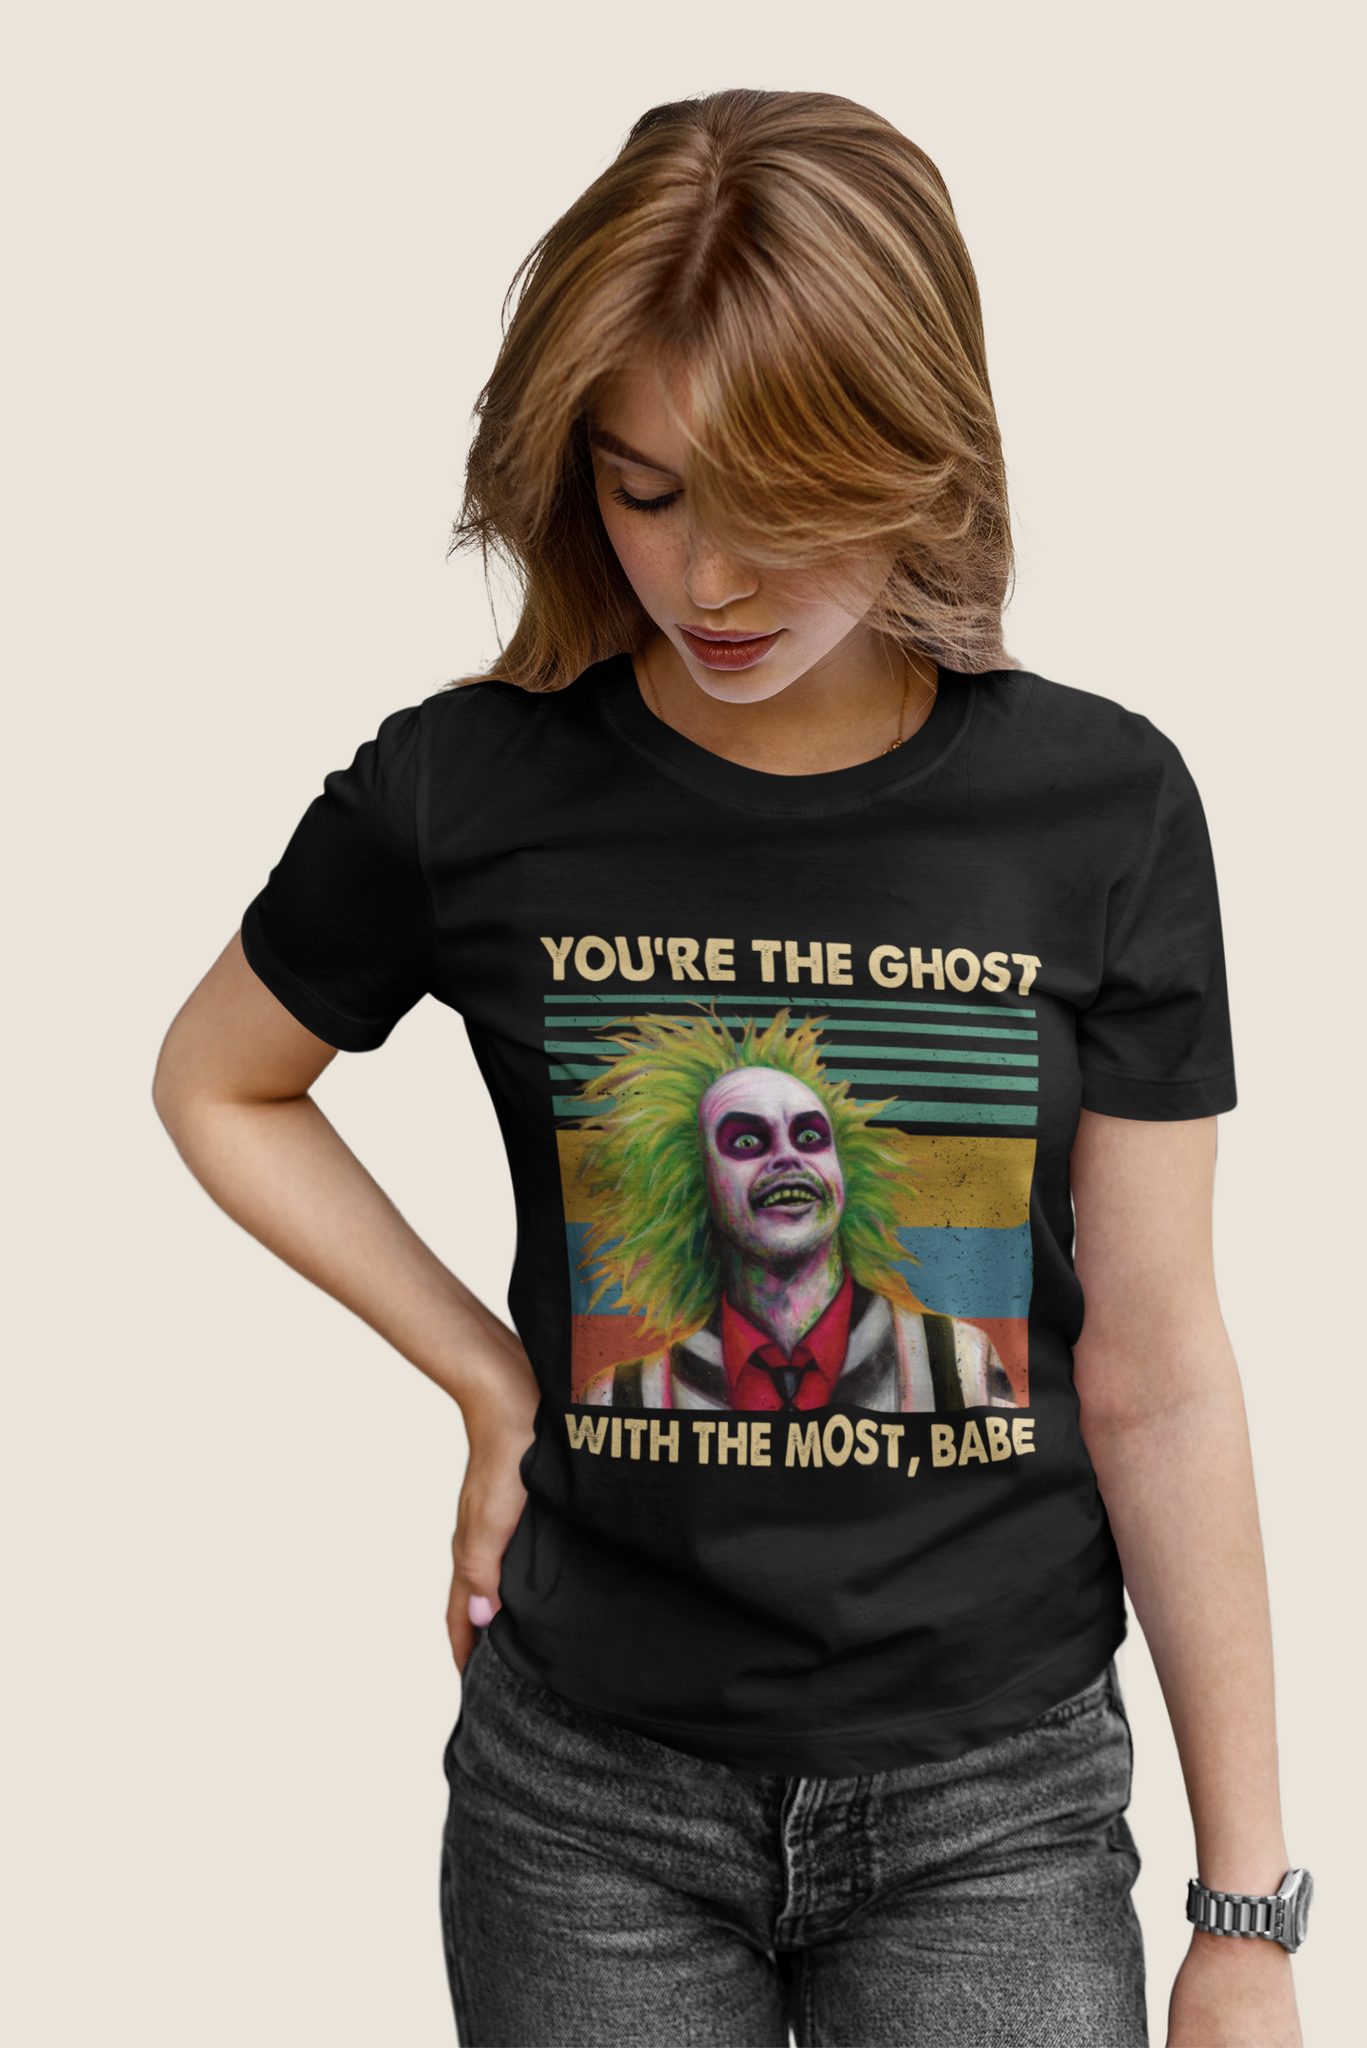 Beetlejuice Vintage T Shirt, Youre The Ghost With The Most Babe Shirt, Halloween Gifts